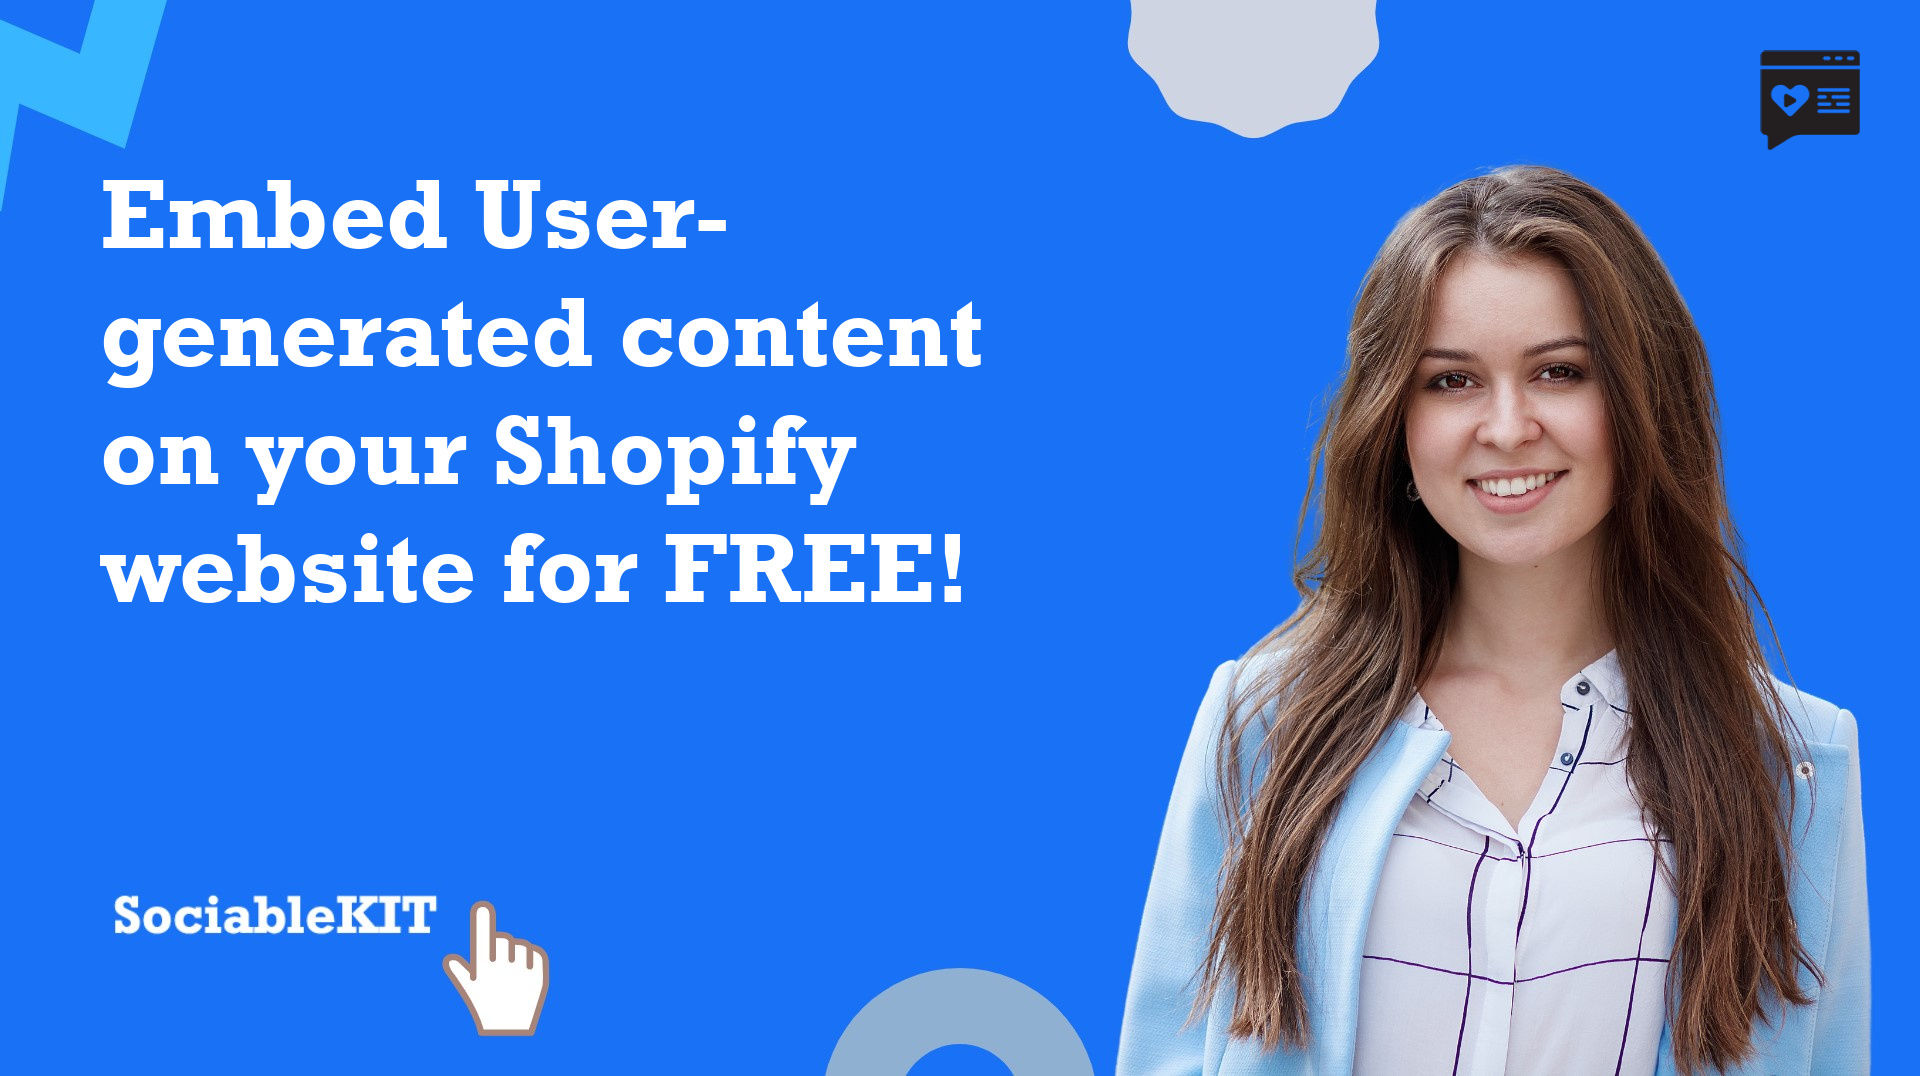 How to embed User-generated content on your Shopify website for FREE?